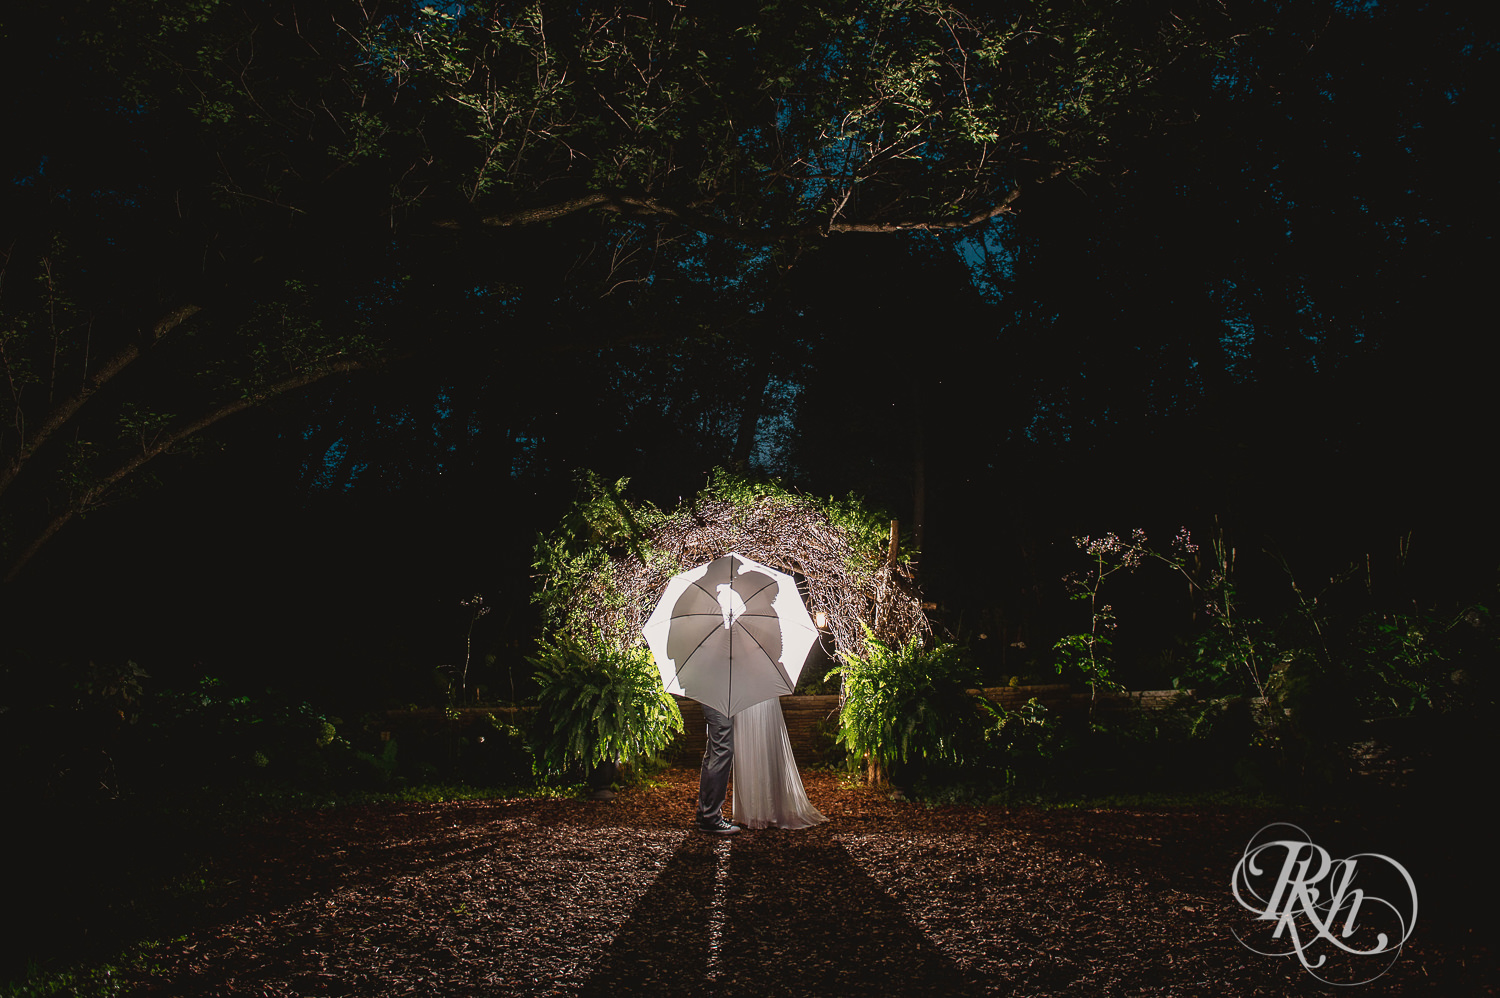 Bride and groom kiss under arch at night at Camrose Hill Flower Farm in Stillwater, Minnesota.